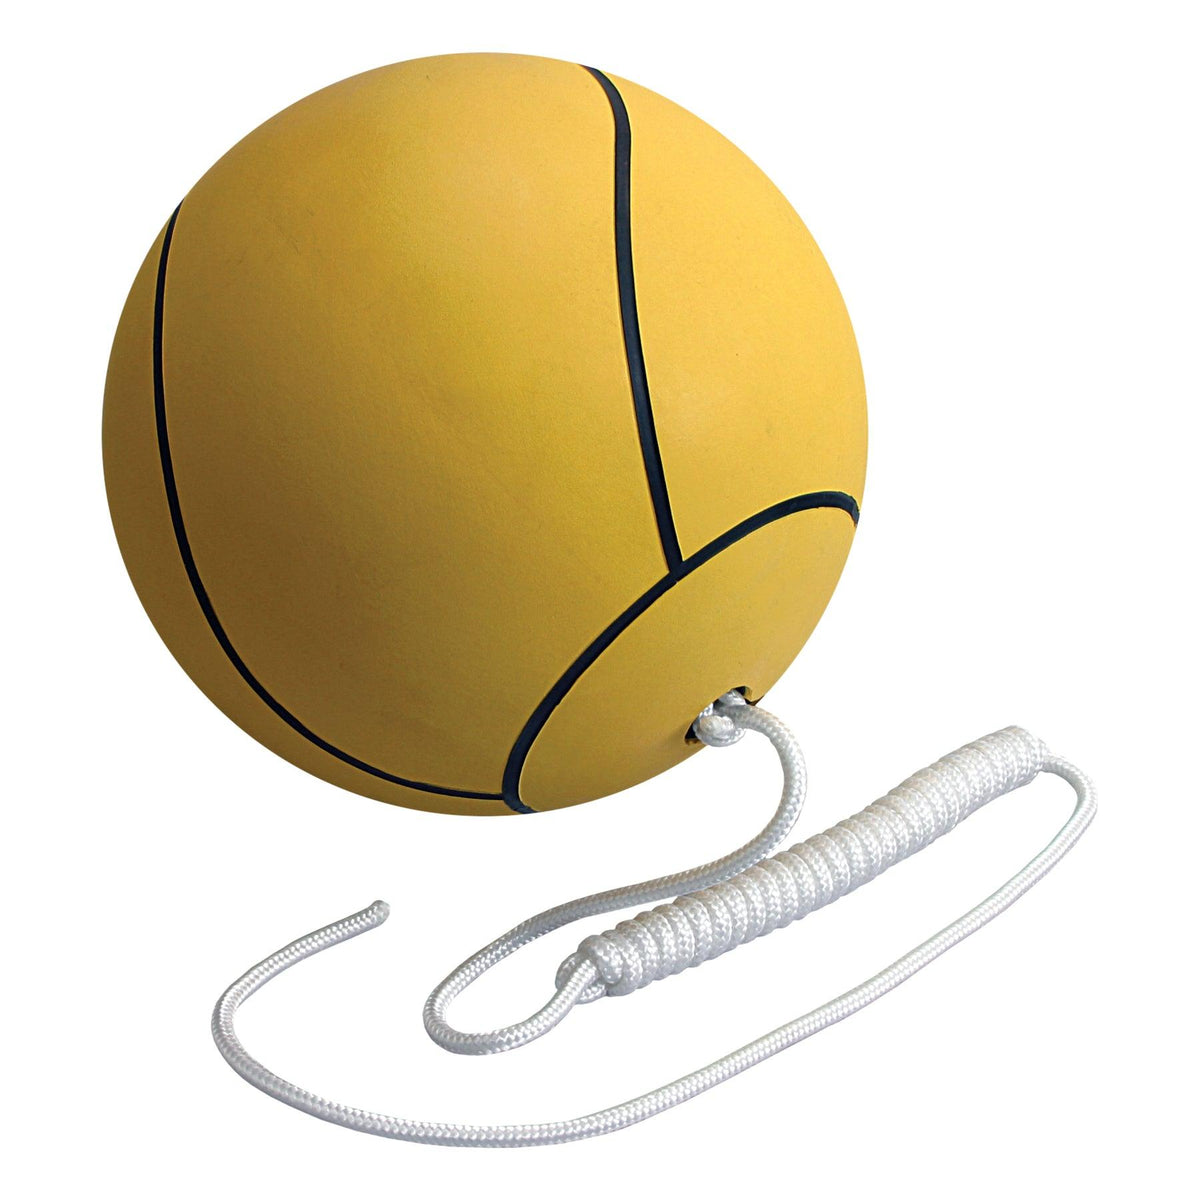 TETHERBALL RUBBER WITH CORD - Marcotte Sports Inc